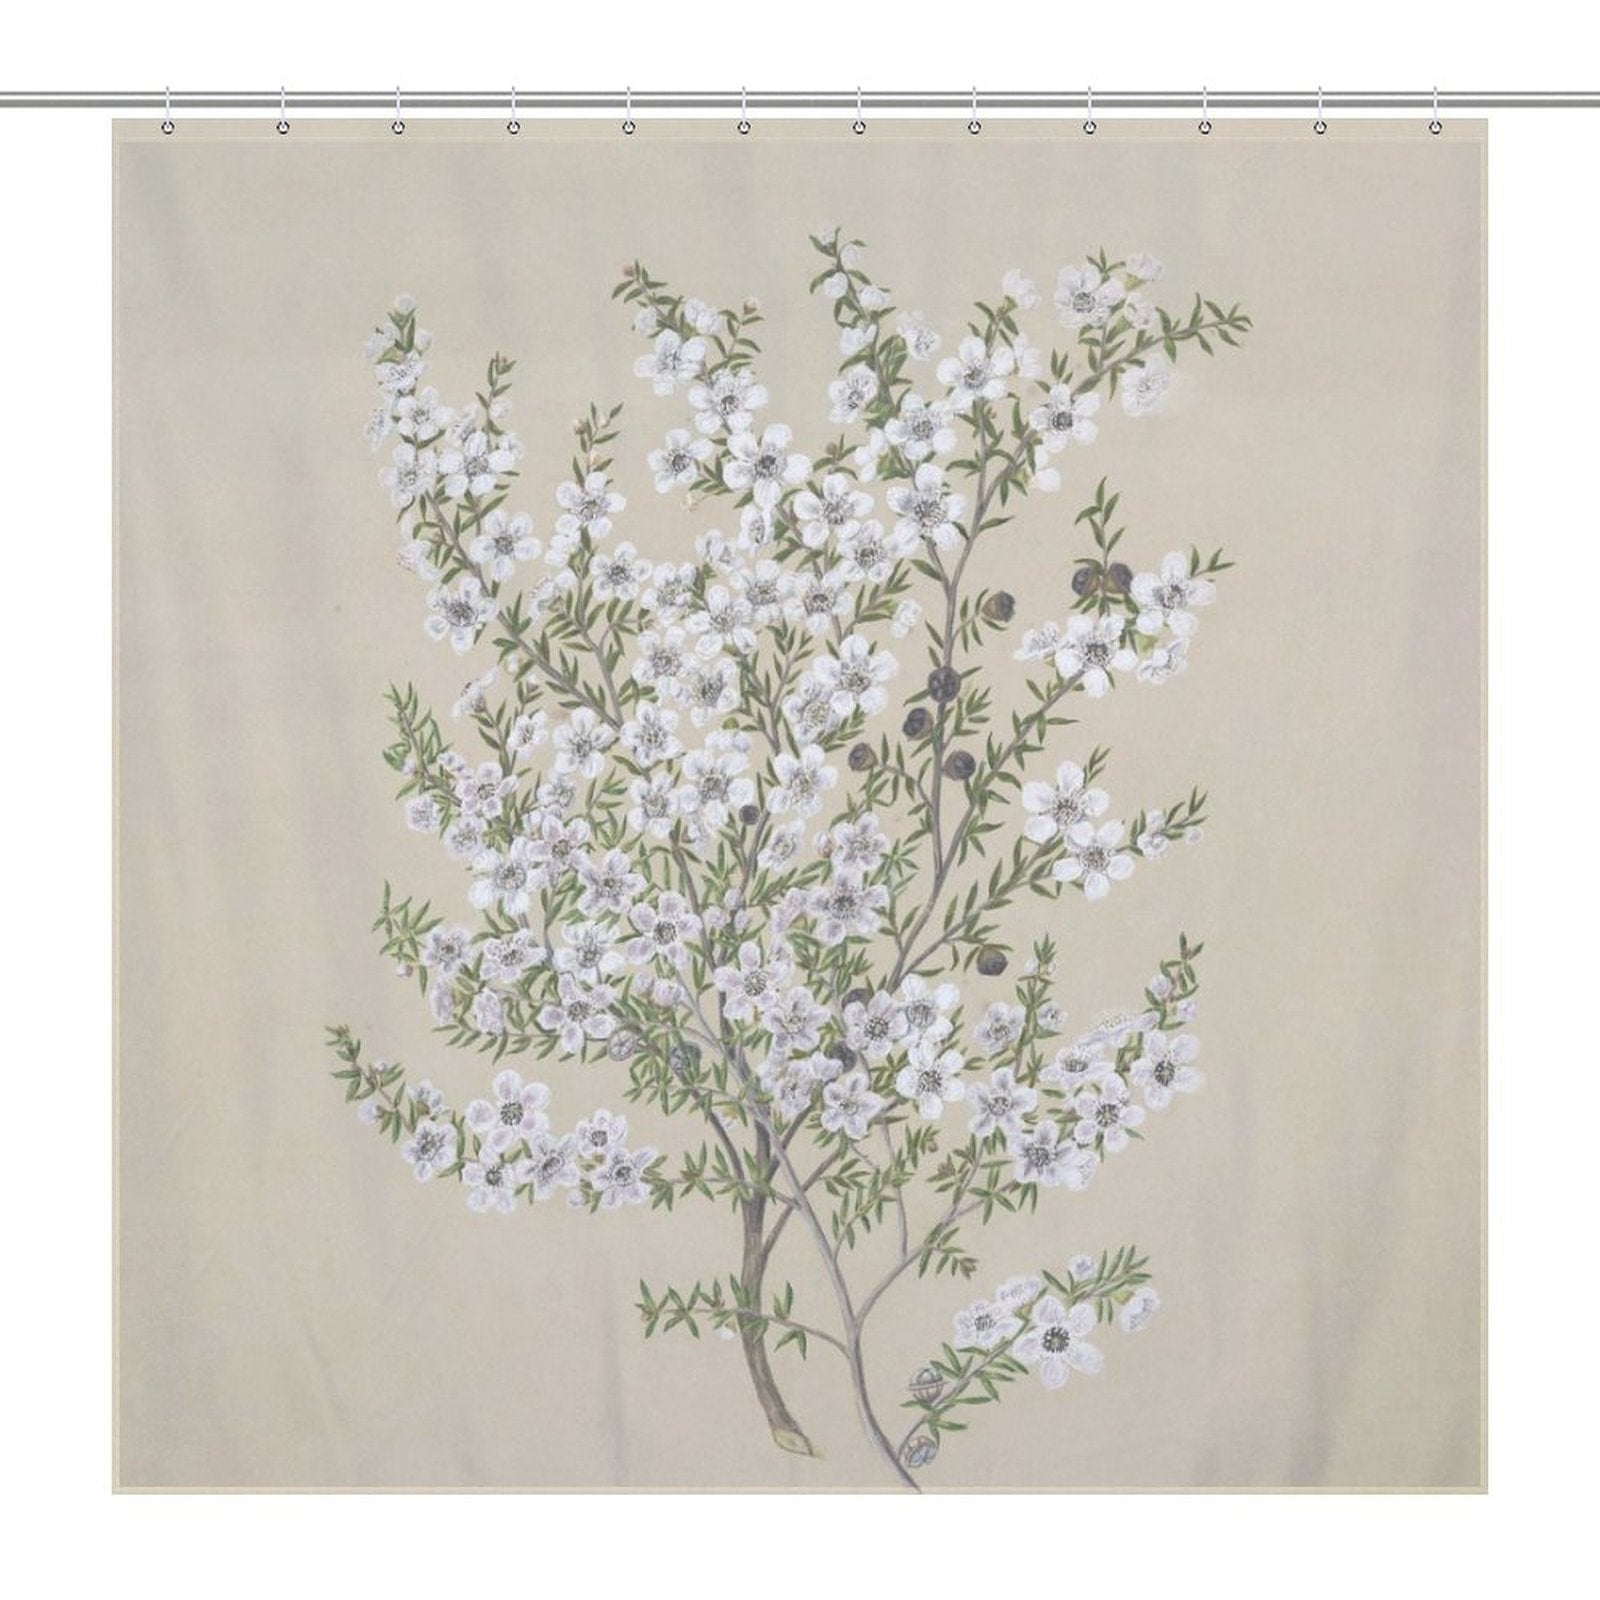 A Retro Green Flower Shower Curtain-Cottoncat, from Cotton Cat, adorned with an illustration of a branch of white flowering blossoms and green foliage, exuding botanical elegance that's perfect for vintage bathroom decor.